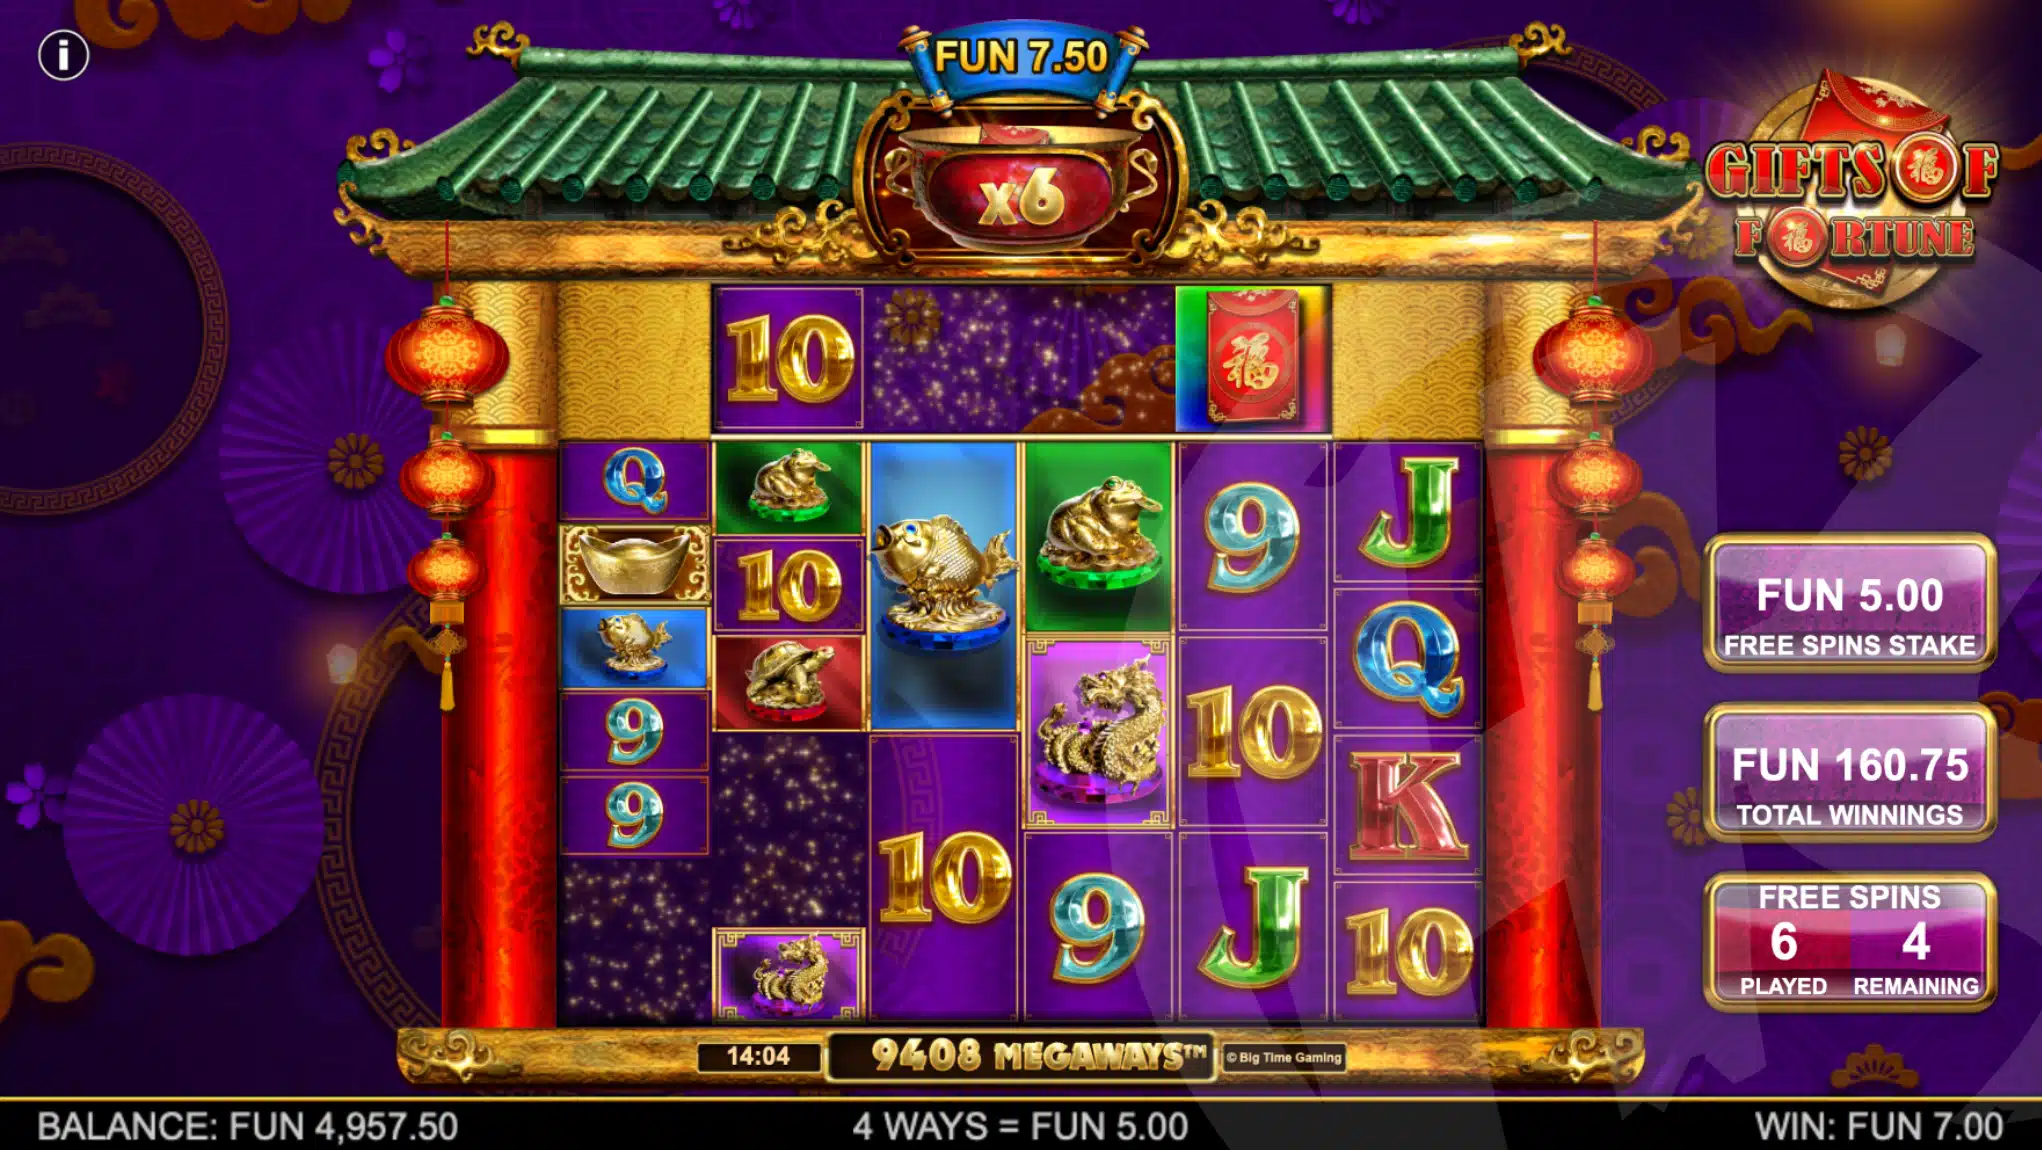 Gifts of Fortune Free Spins